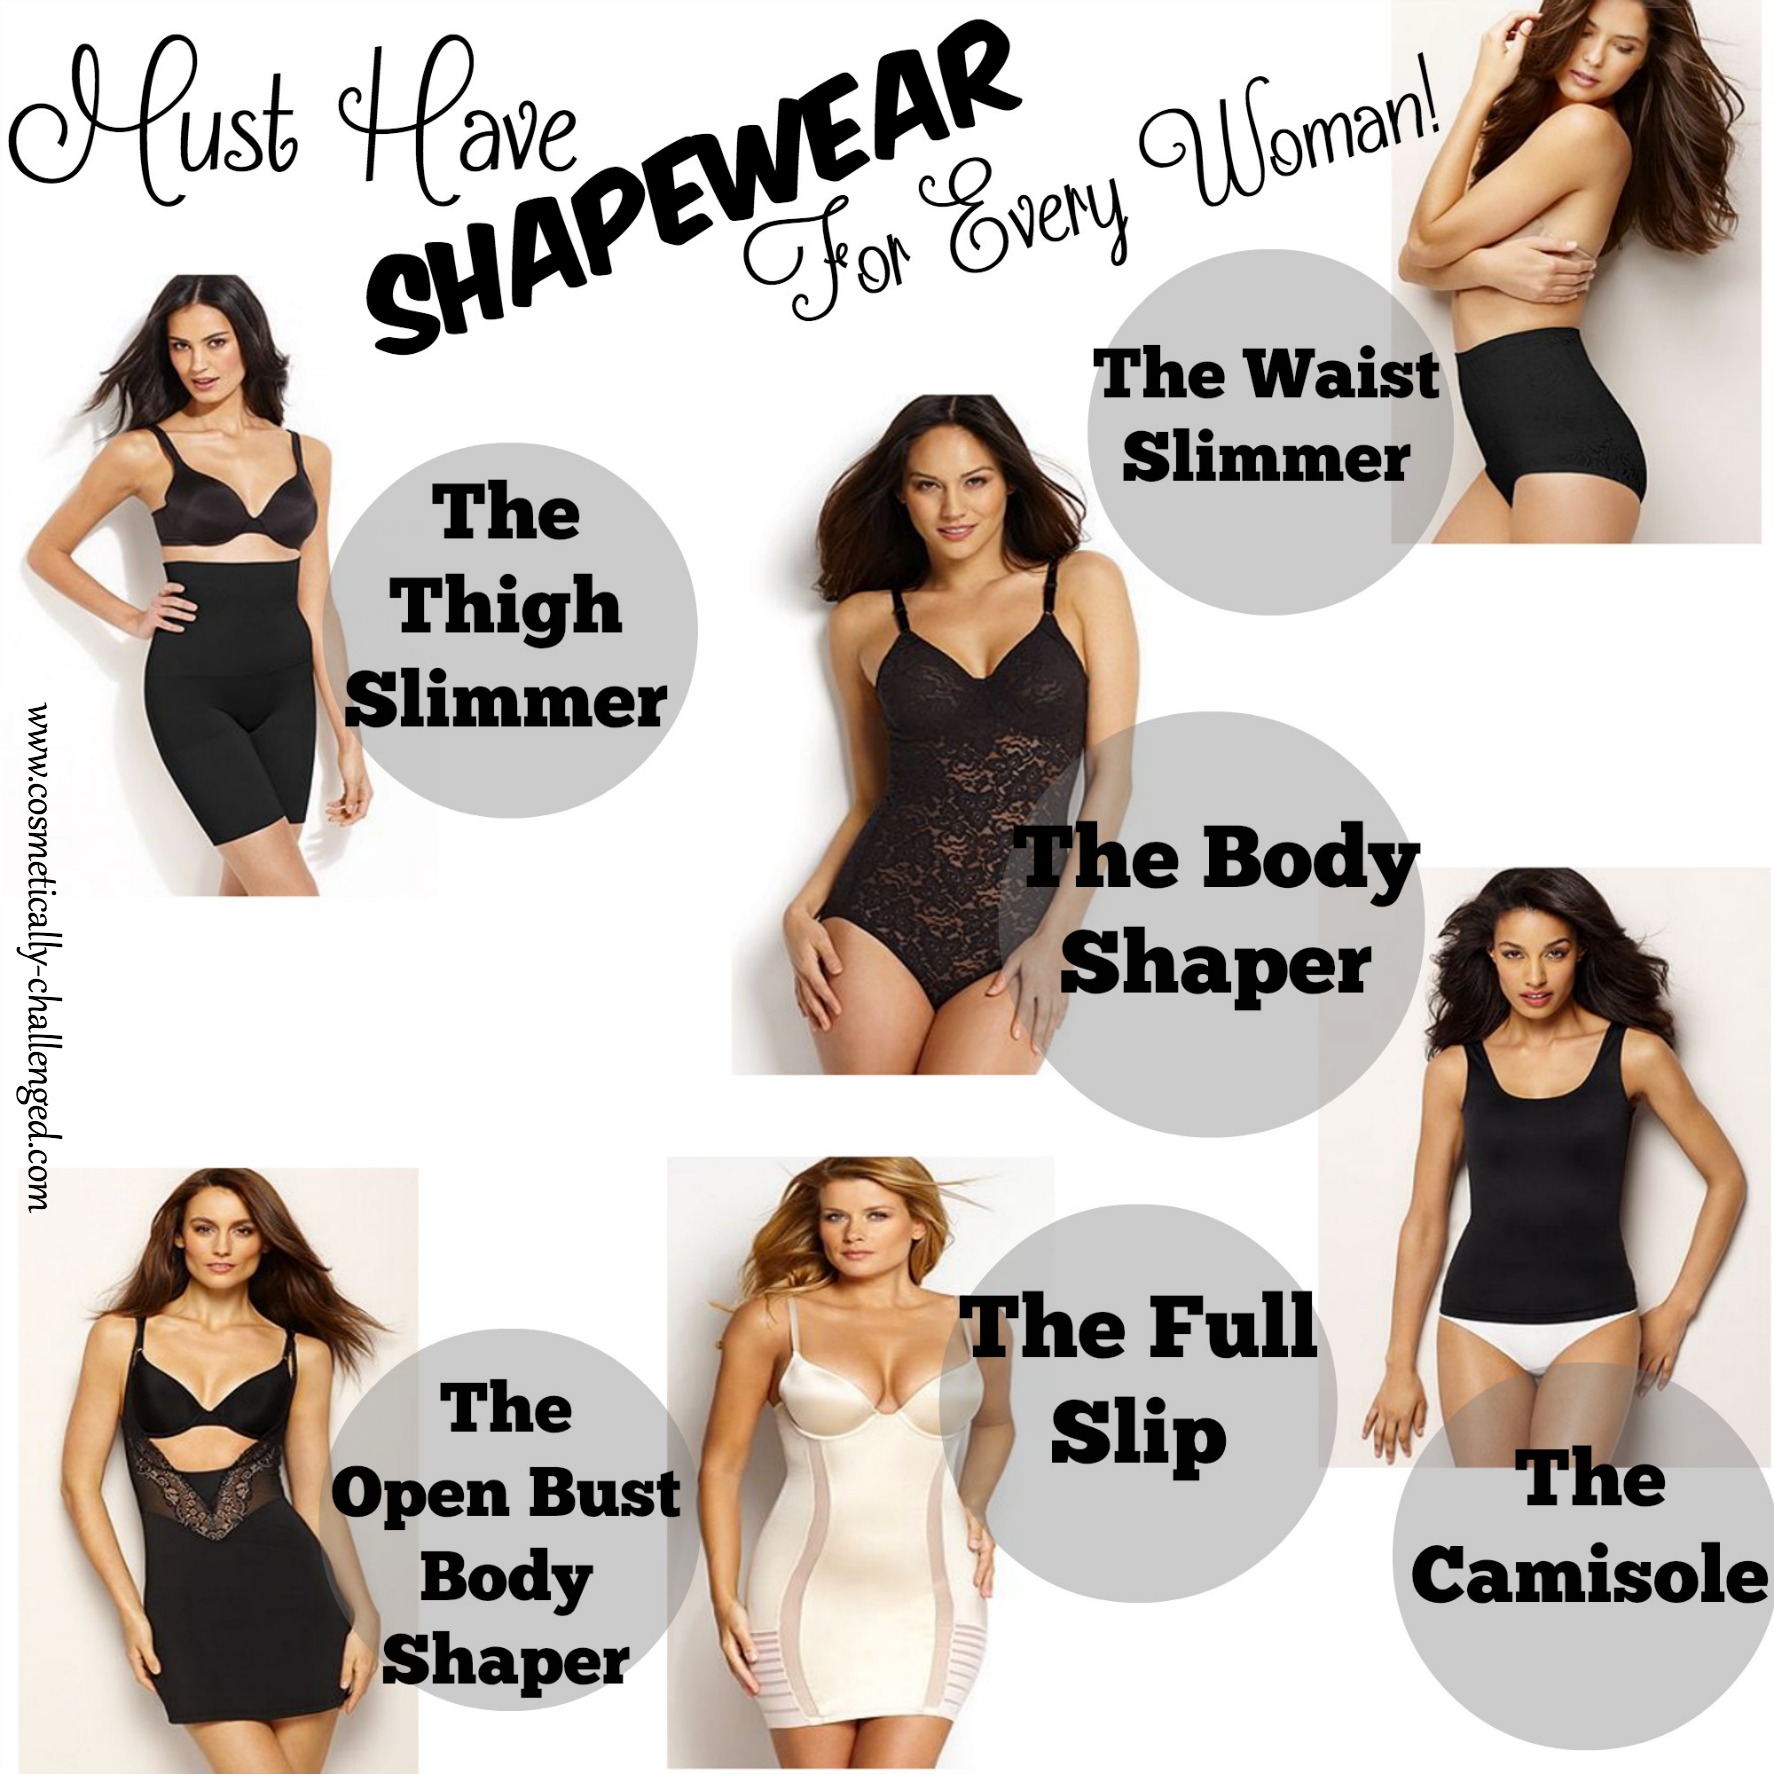 Benefits of Wearing Shapewear for All Types of Women